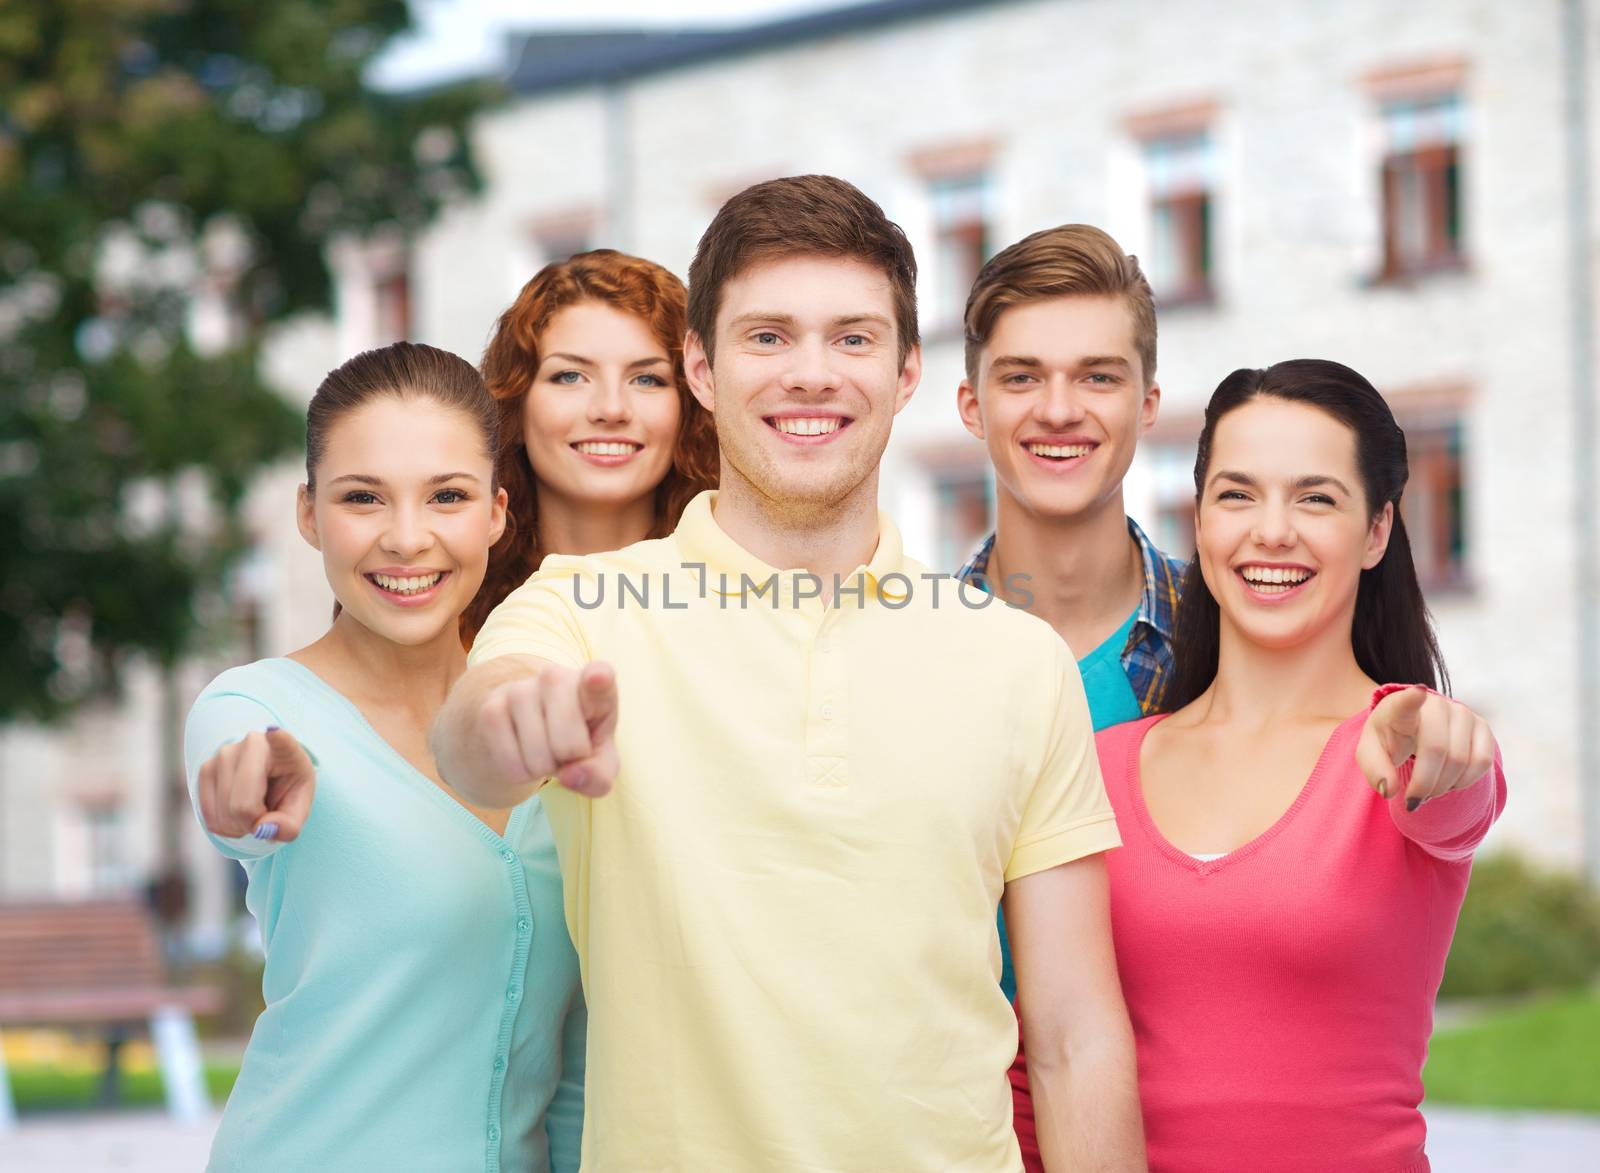 group of smiling teenagers over campus background by dolgachov